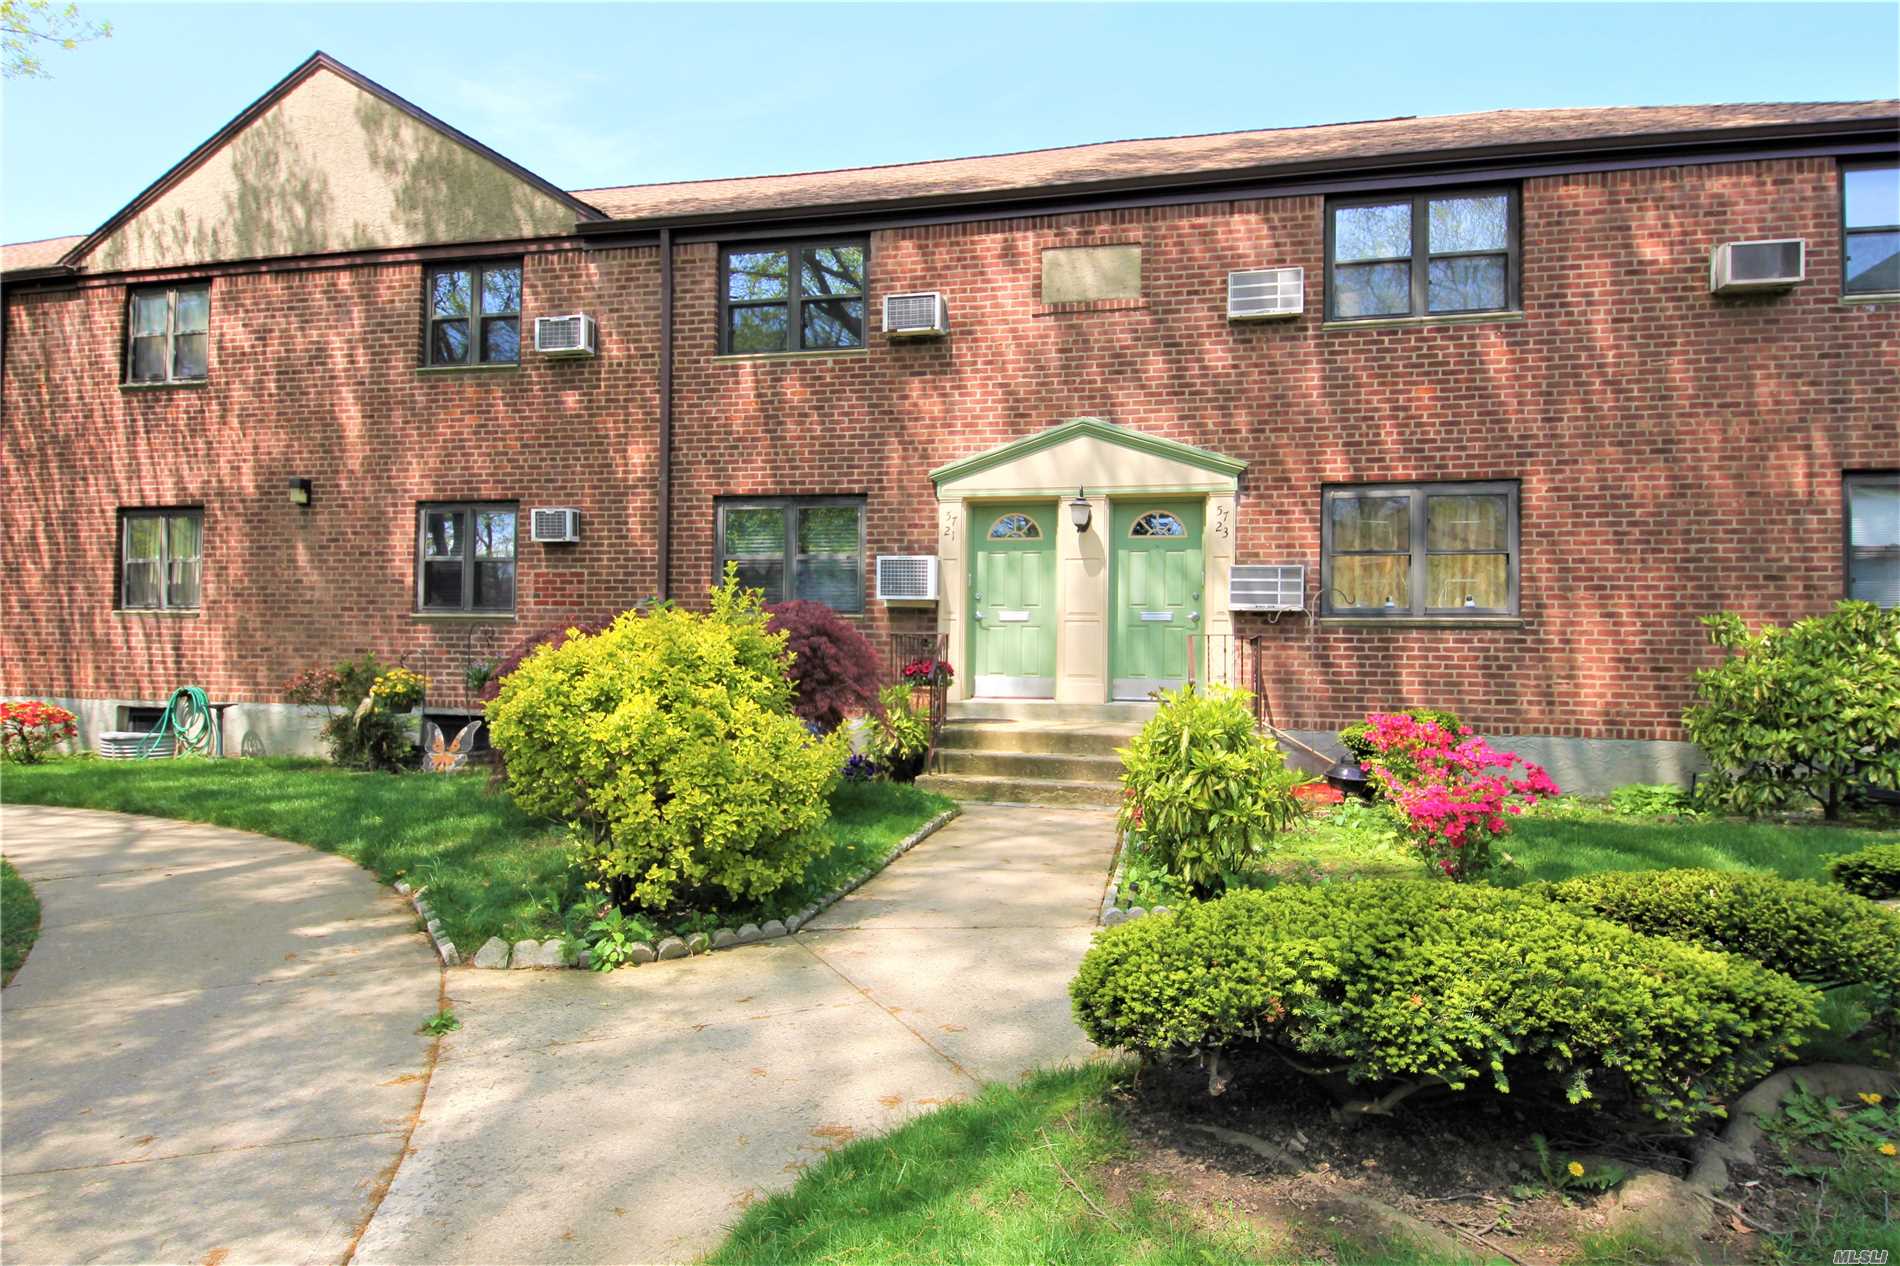 Great Location! Close To Fairway Supermarket, Lie, Douglaston Golf Course, Alley Pond Park. This 2 Bedroom, One Bath Co-Op Apartment Is On The 2nd Floor. The Apartment Is Ready For Someone To Add Their Own Personal Touches. Renovated Bathroom. Kitchen Needs Some Updating.